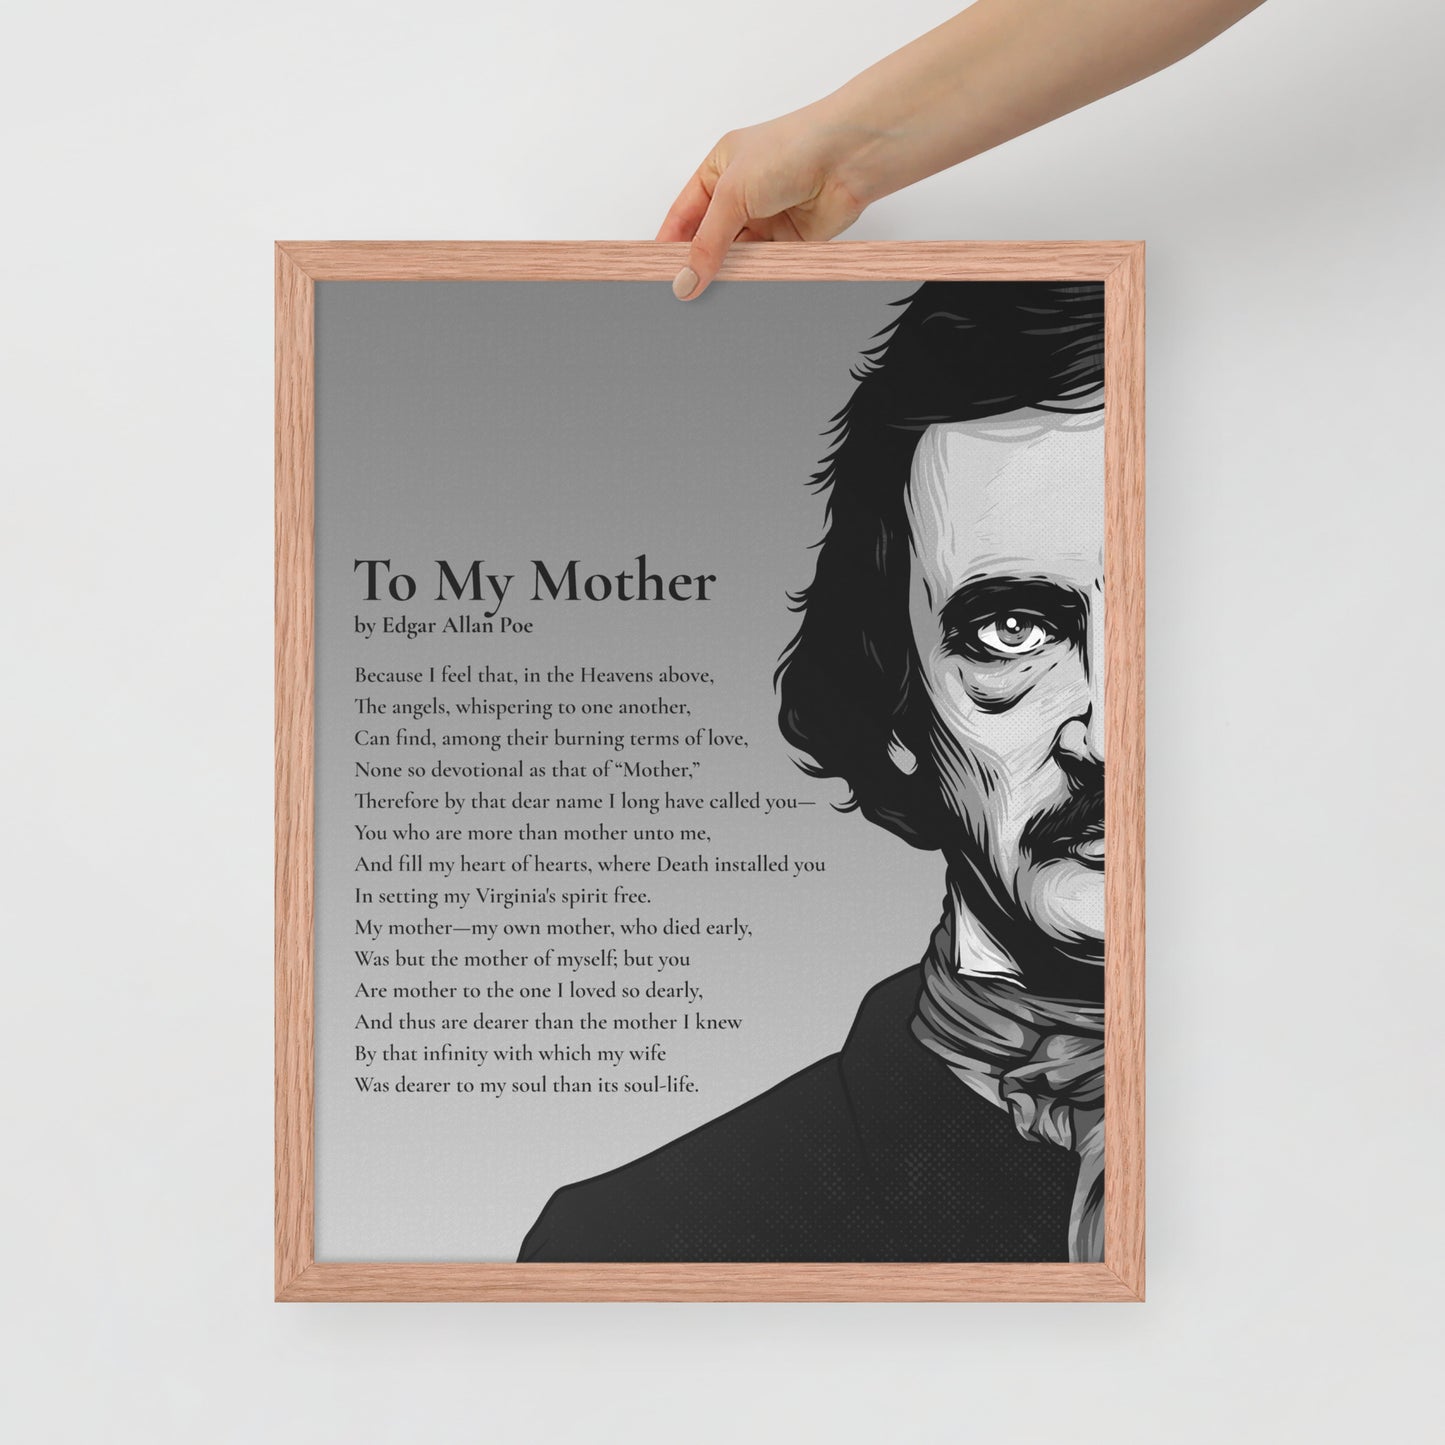 Edgar Allan Poe's 'To My Mother' Framed Matted Poster - 16 x 20 Red Oak Frame